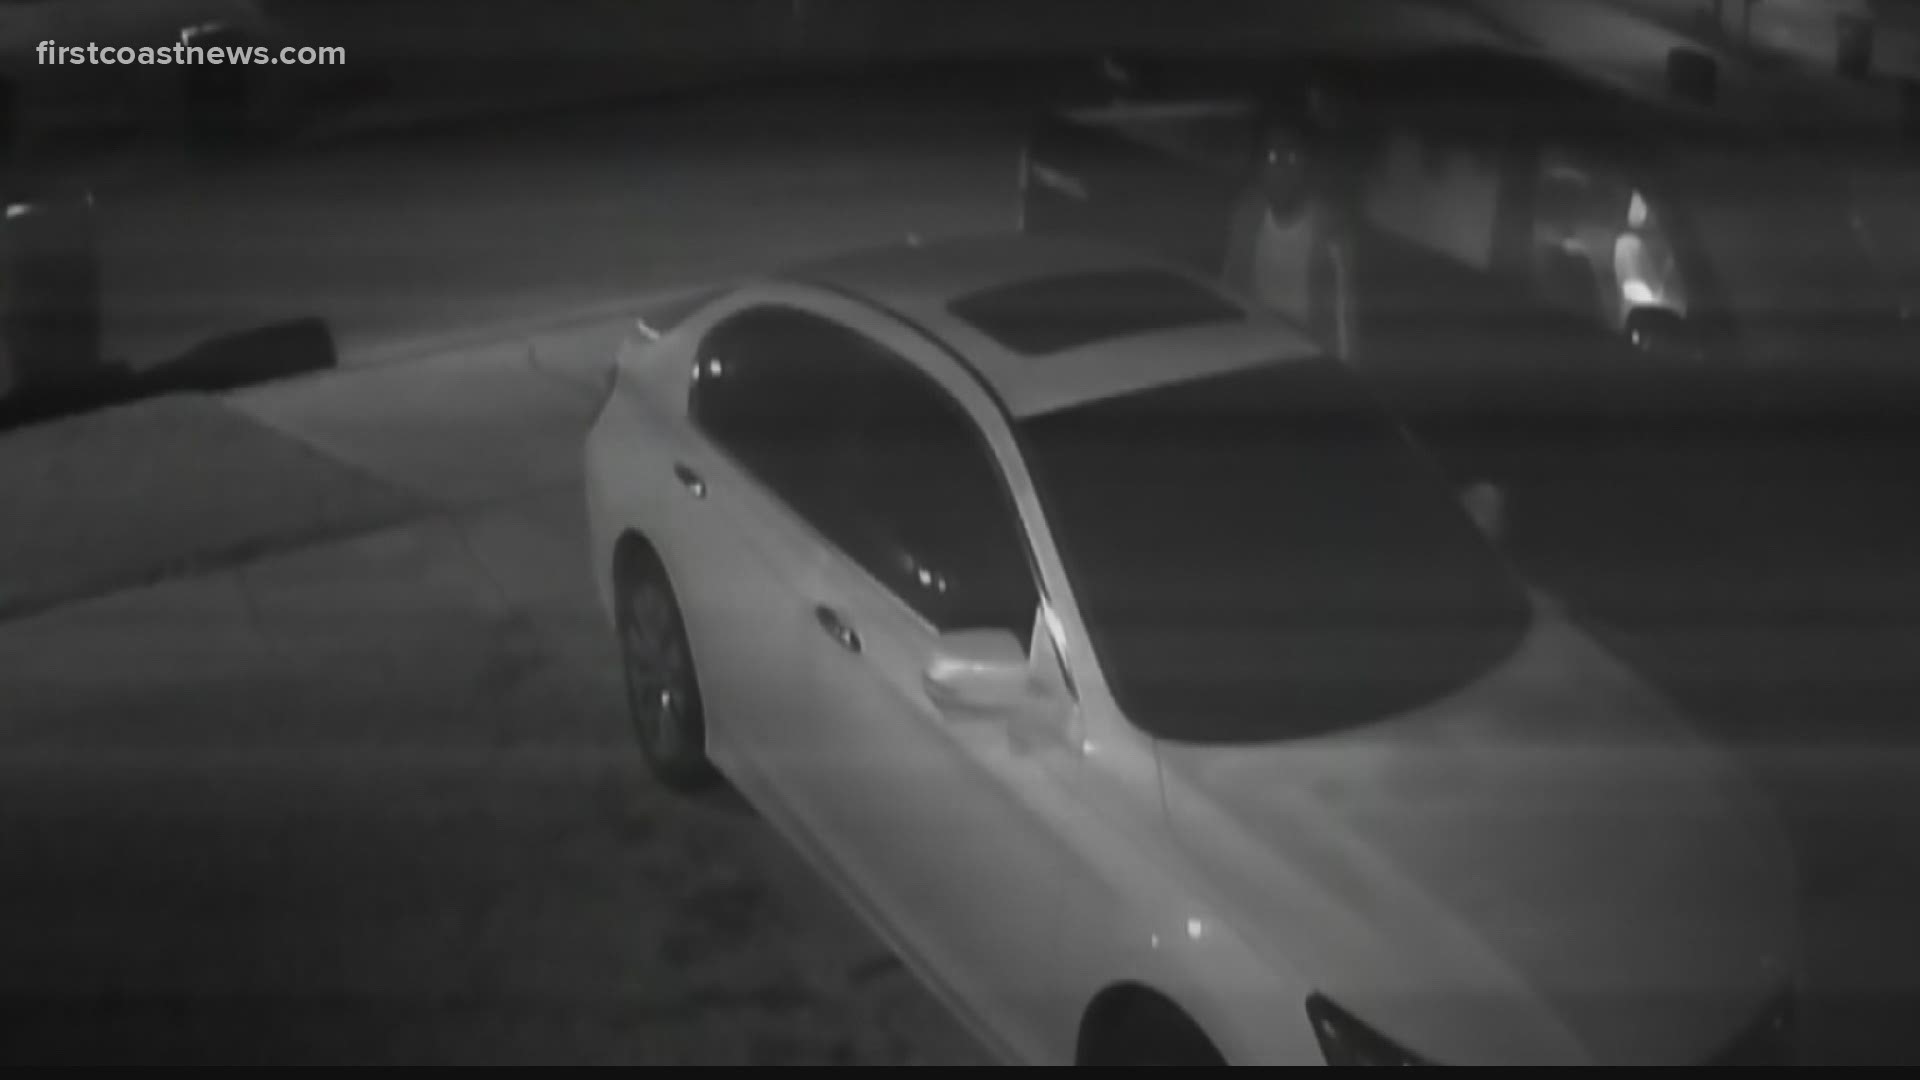 Have you done the 9 p.m. routine? JSO reminds you to remove valuables from vehicles to prevent burglaries